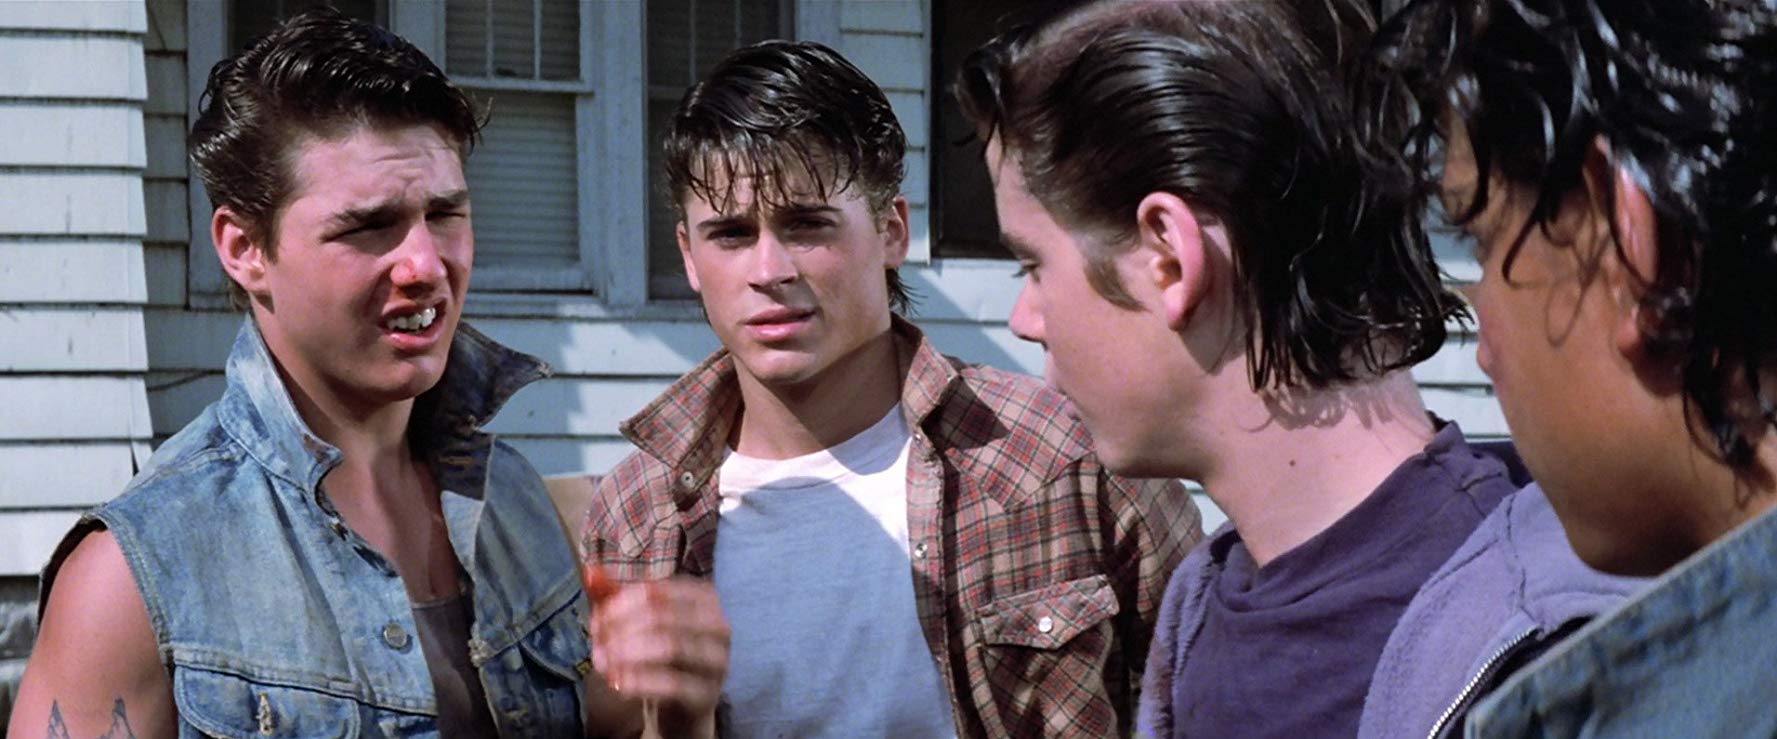 Francis Ford Coppola Had Rob Lowe and Tom Cruise Stay With Strangers While Filming ‘The Outsiders’